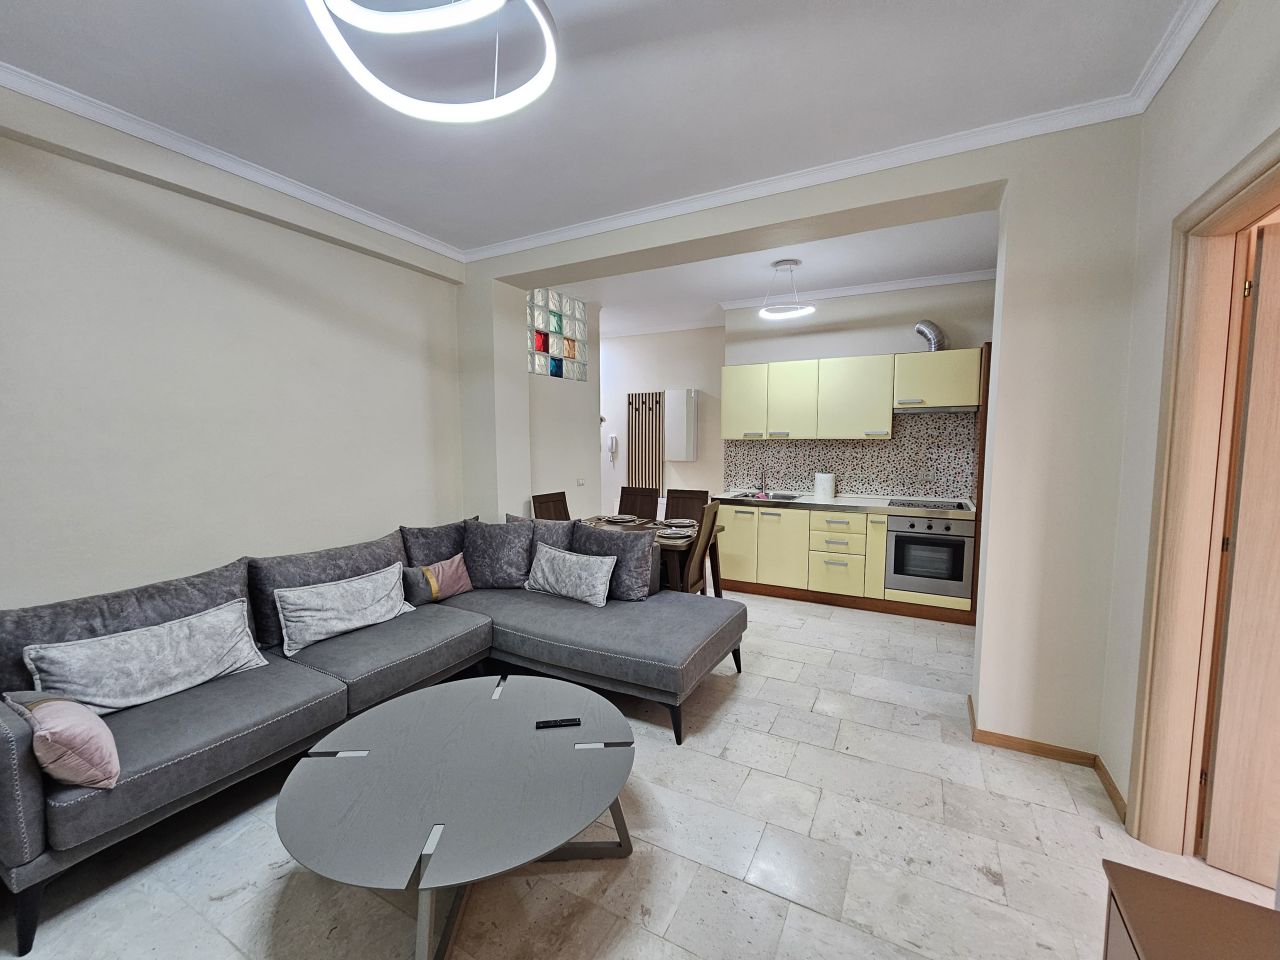 Property For Daily Rent In Vlora Albania